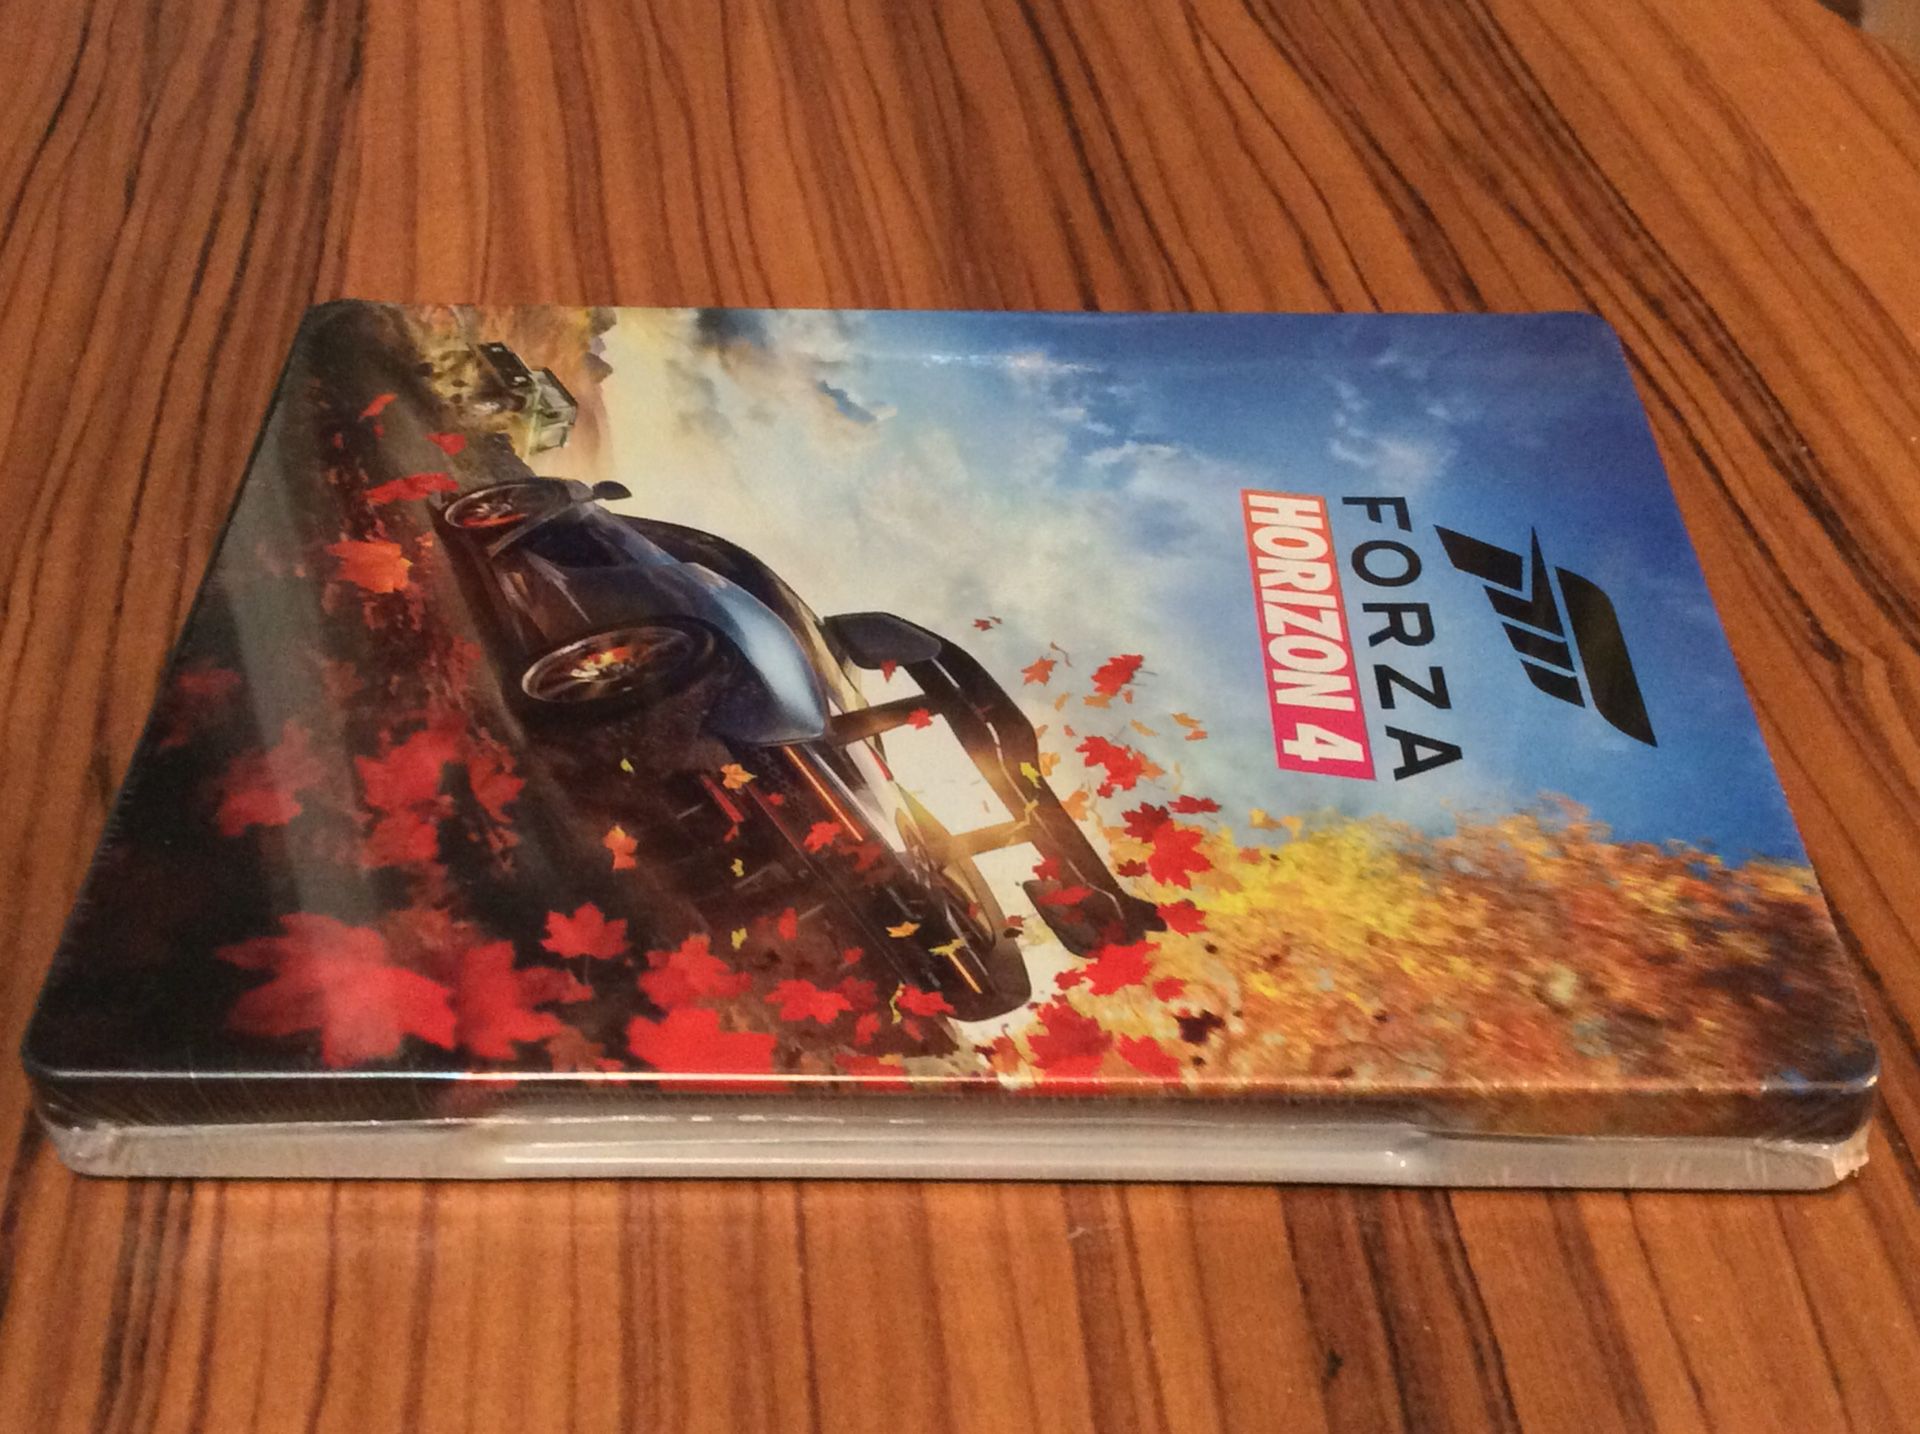 Forza Horizon 4 Collectors Steelbook Edition+Digital Game FOR XBOX X|S and  Xbox One for Sale in Princeton, TX - OfferUp